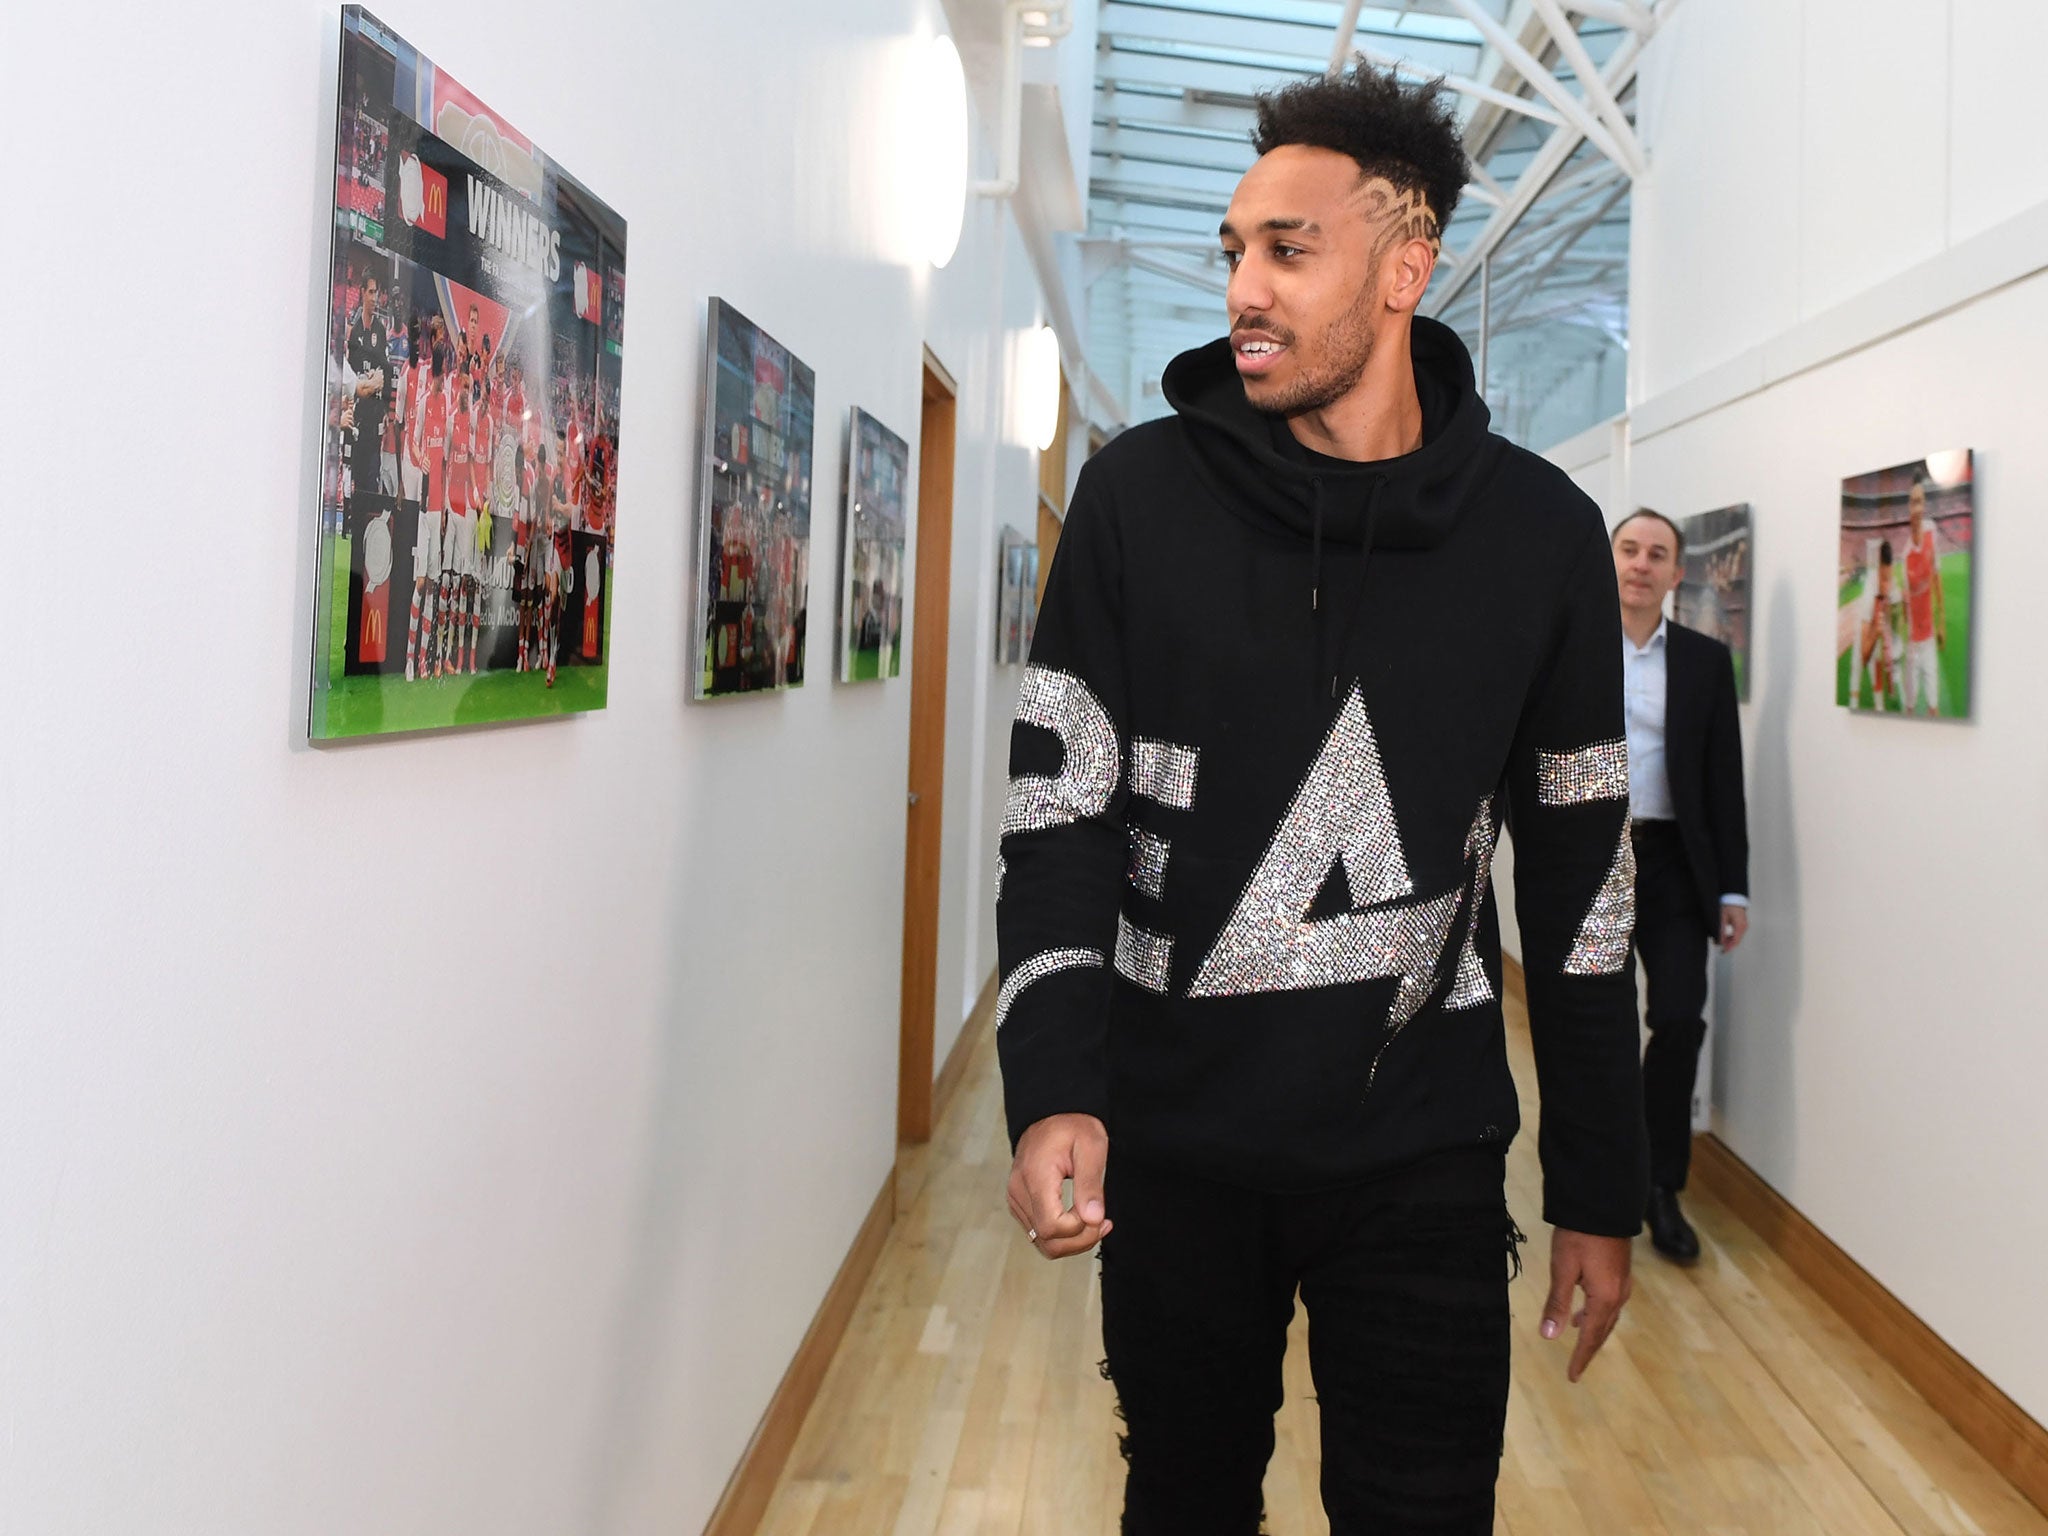 Pierre-Emerick Aubameyang was unveiled as an Arsenal player on Wednesday